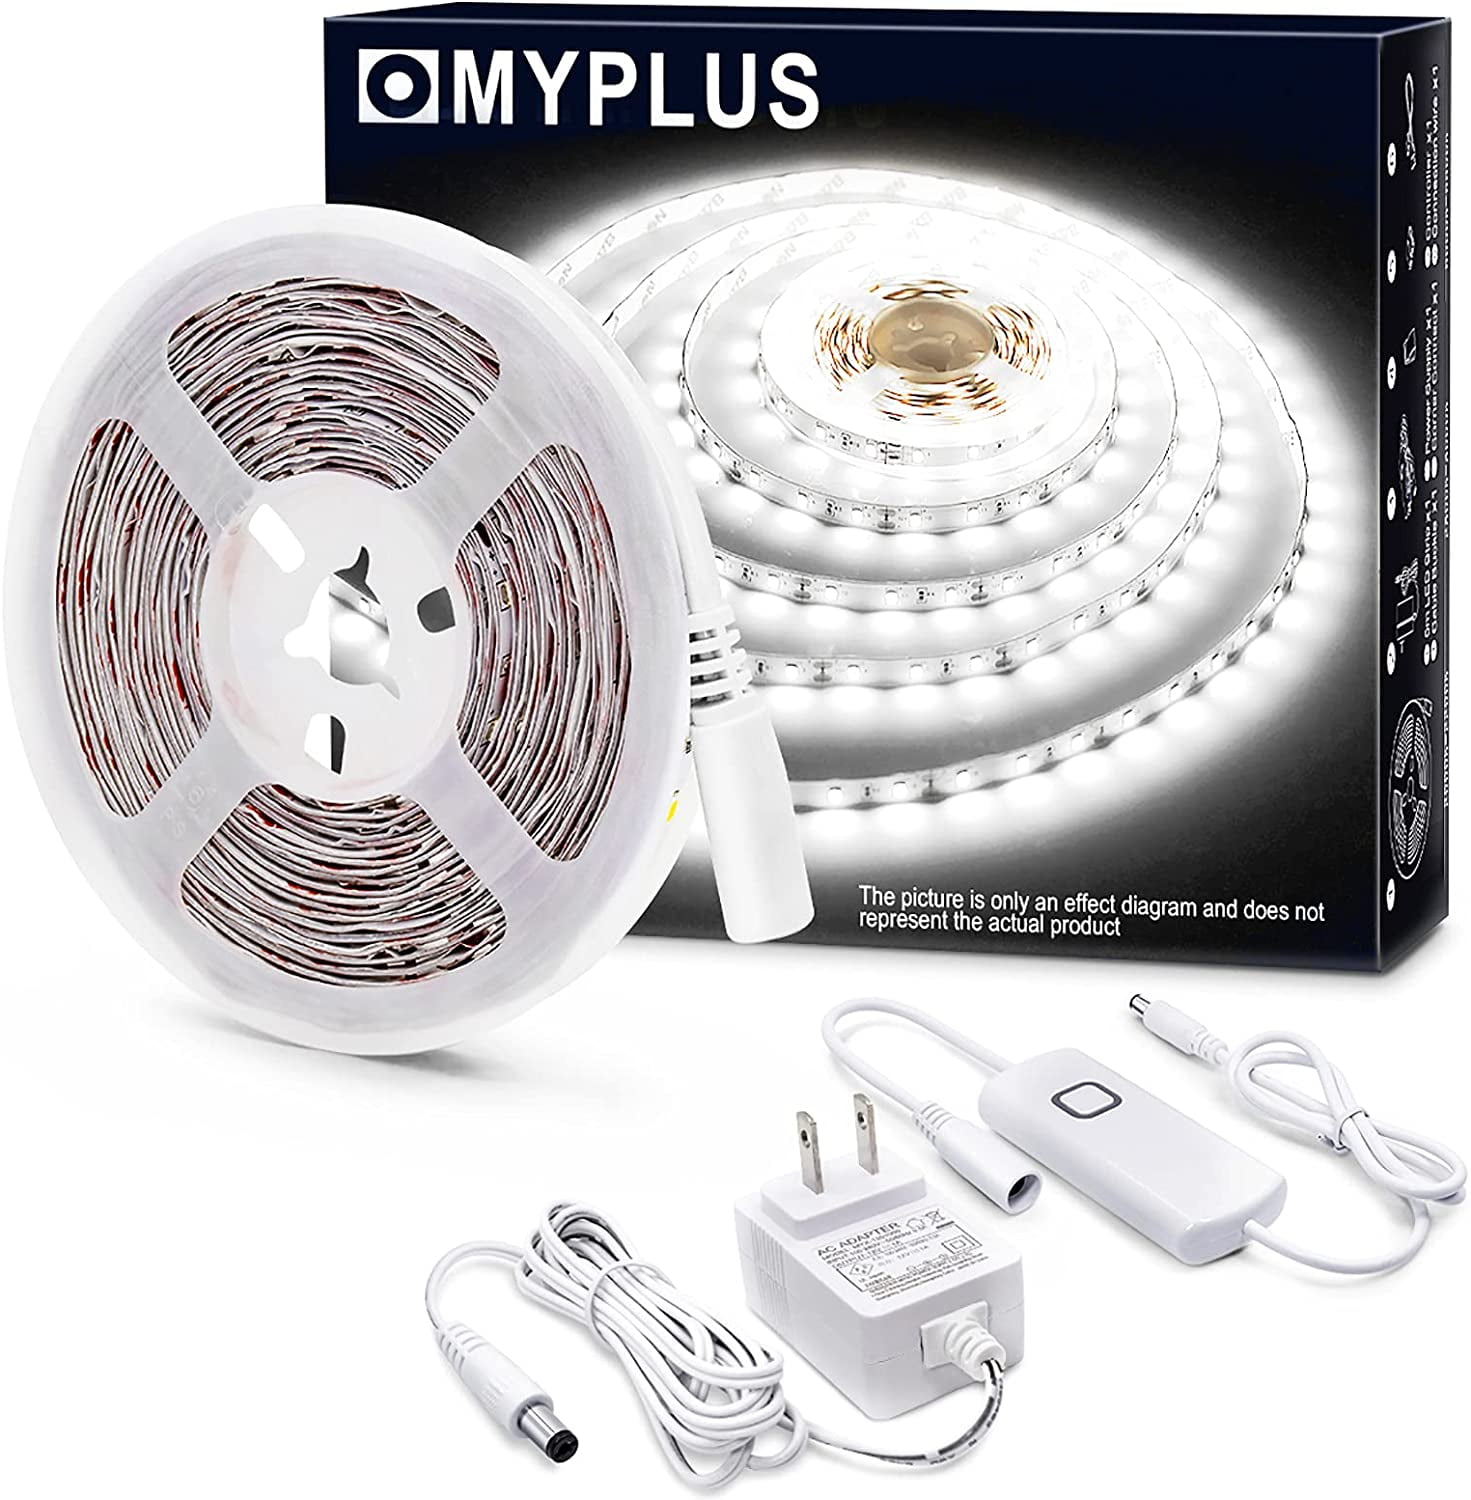 LED Lights Daylight White 6000K LED Tape Lights with Dimmable 700 Lumen and 300 LEDs Bright Flexible Led Light Strip for Vanity Mirror,Under Cabinet,Kitchen,Bedroom - Walmart.com